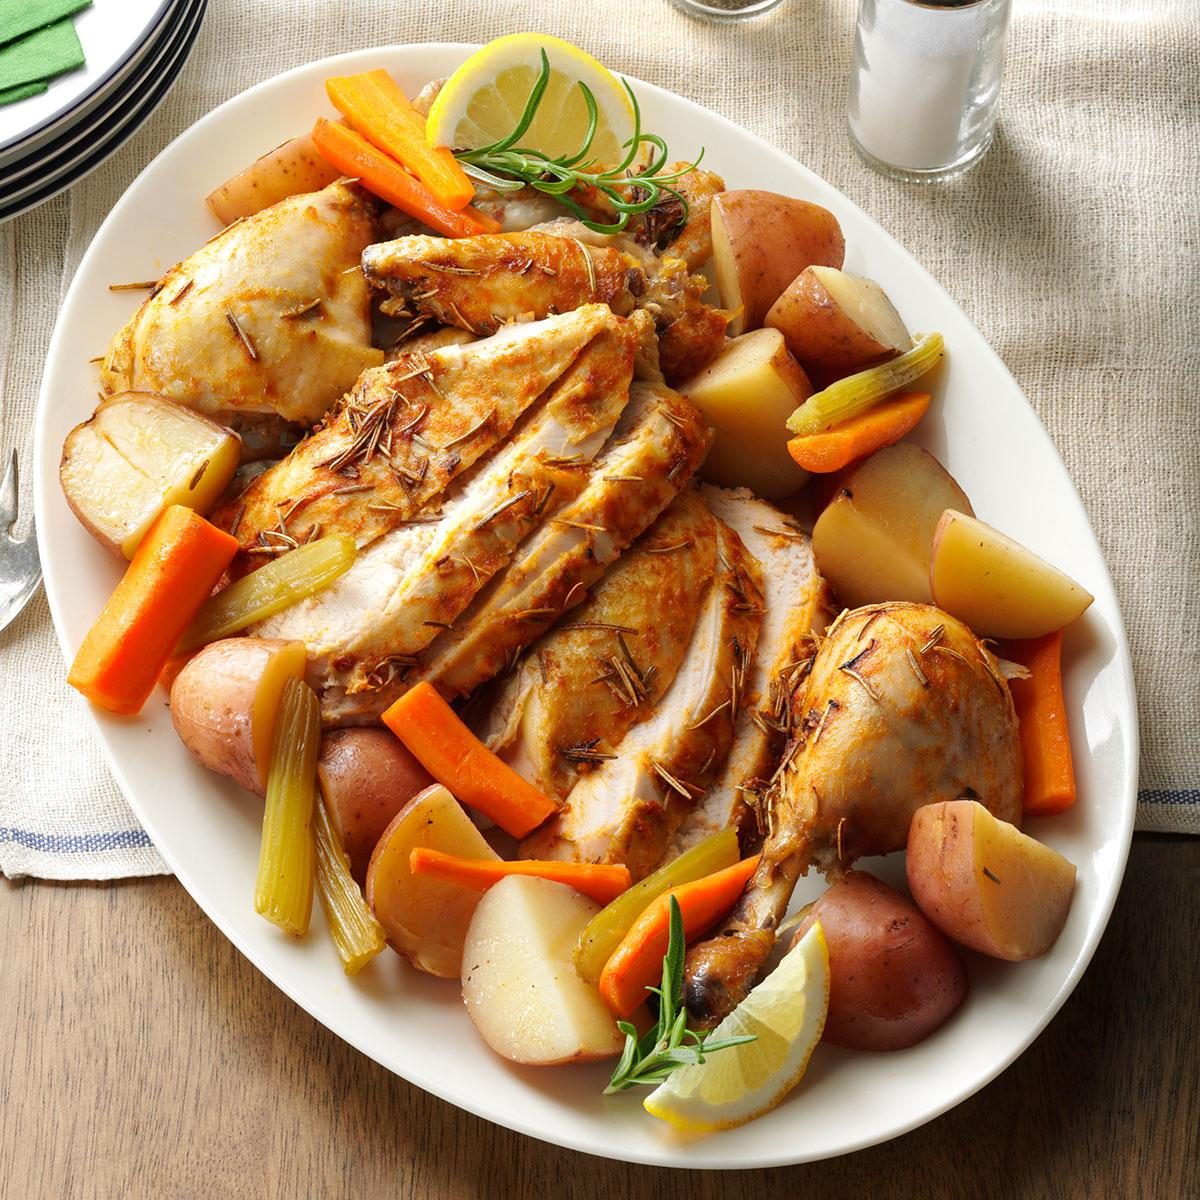 https://www.tasteofhome.com/wp-content/uploads/2018/01/Slow-Roasted-Chicken-with-Vegetables_exps78125_TH133086B08_01_7bC_RMS-2.jpg?fit=700%2C1024